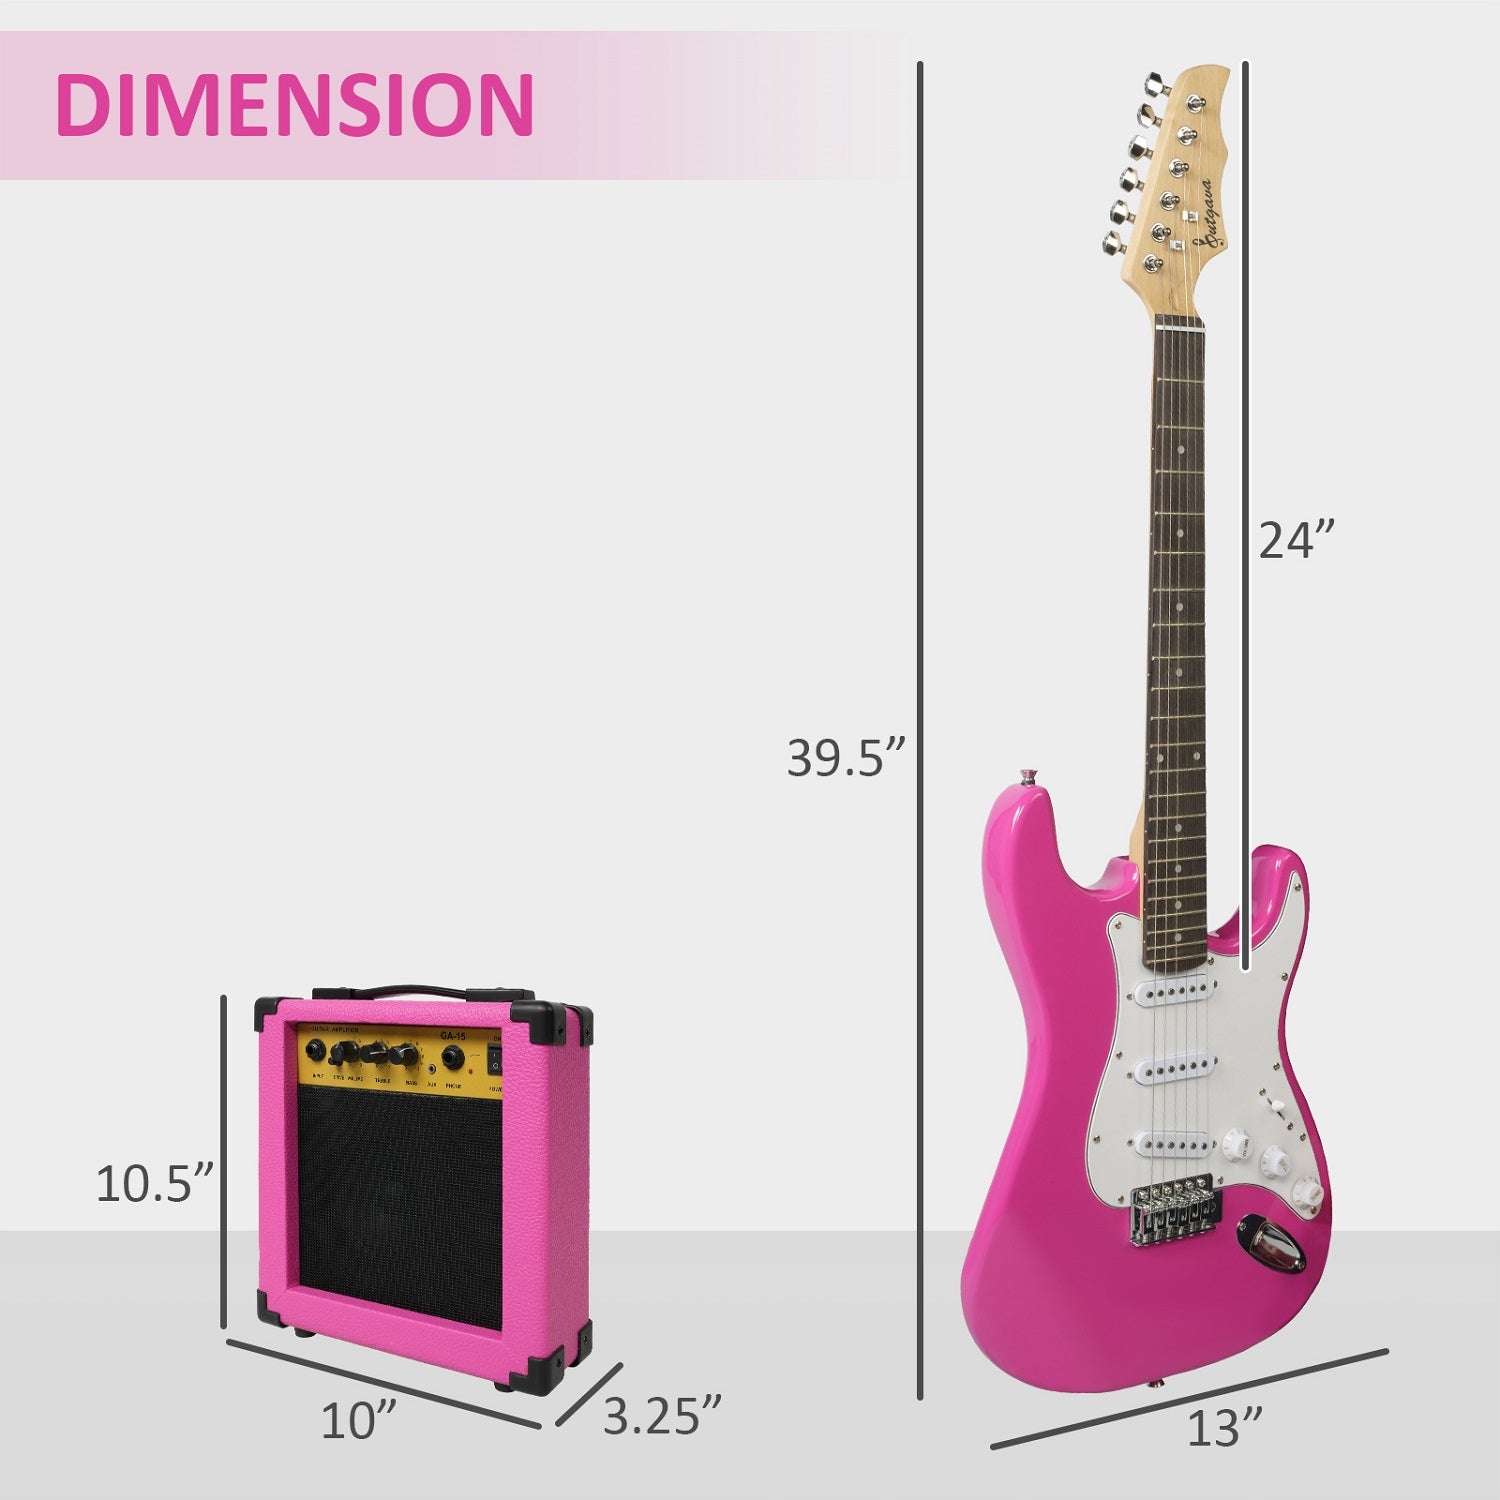 (Out of Stock) Entry Level Electric Guitar Set, 39" Teenage Electric Guitar w/ 15W Amplifier, Carrier Bag, Tuner, Strings, Picks, Cable, Pink